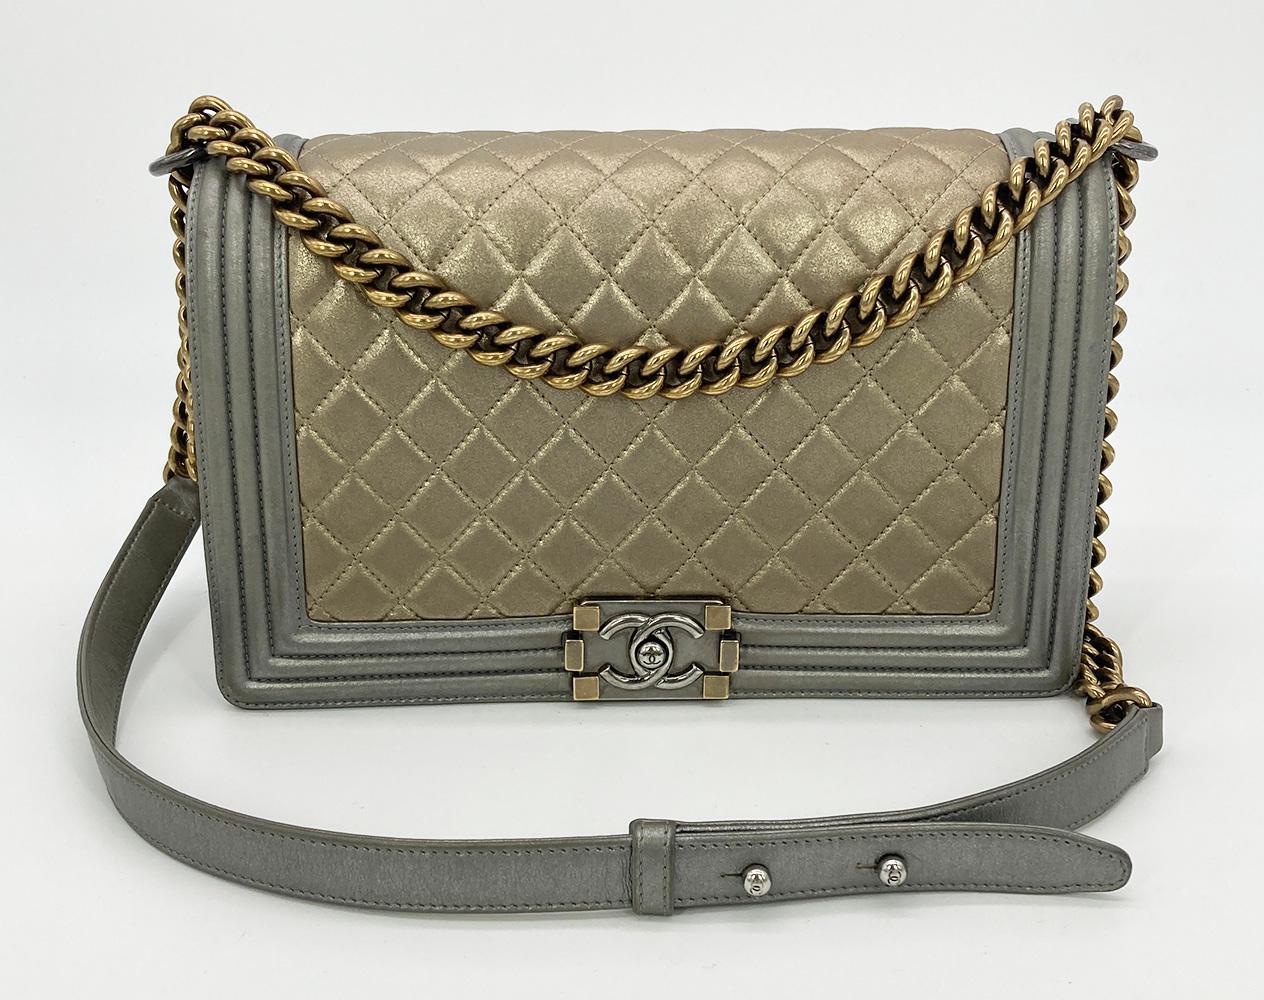 Chanel Gold Silver Leather Medium Boy Bag Classic Flap in good condition. Metallic gold diamond quilted lambskin exterior trimmed with metallic silver stripe quilted leather edges with antiqued brass and silver hardware. Front pinch latch le boy